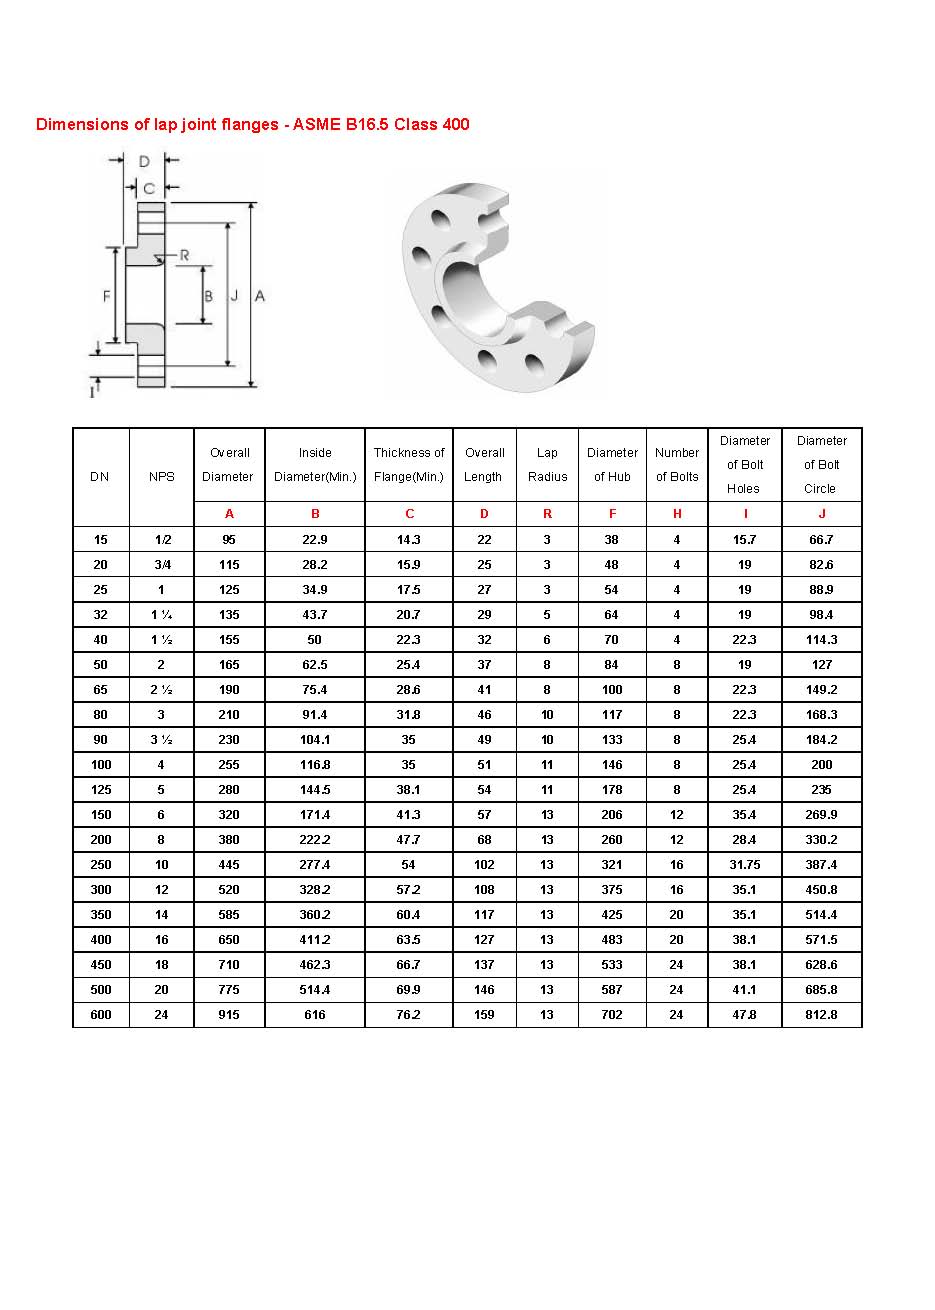 Dimensions of lap joint flanges - ASME B16.5_class400